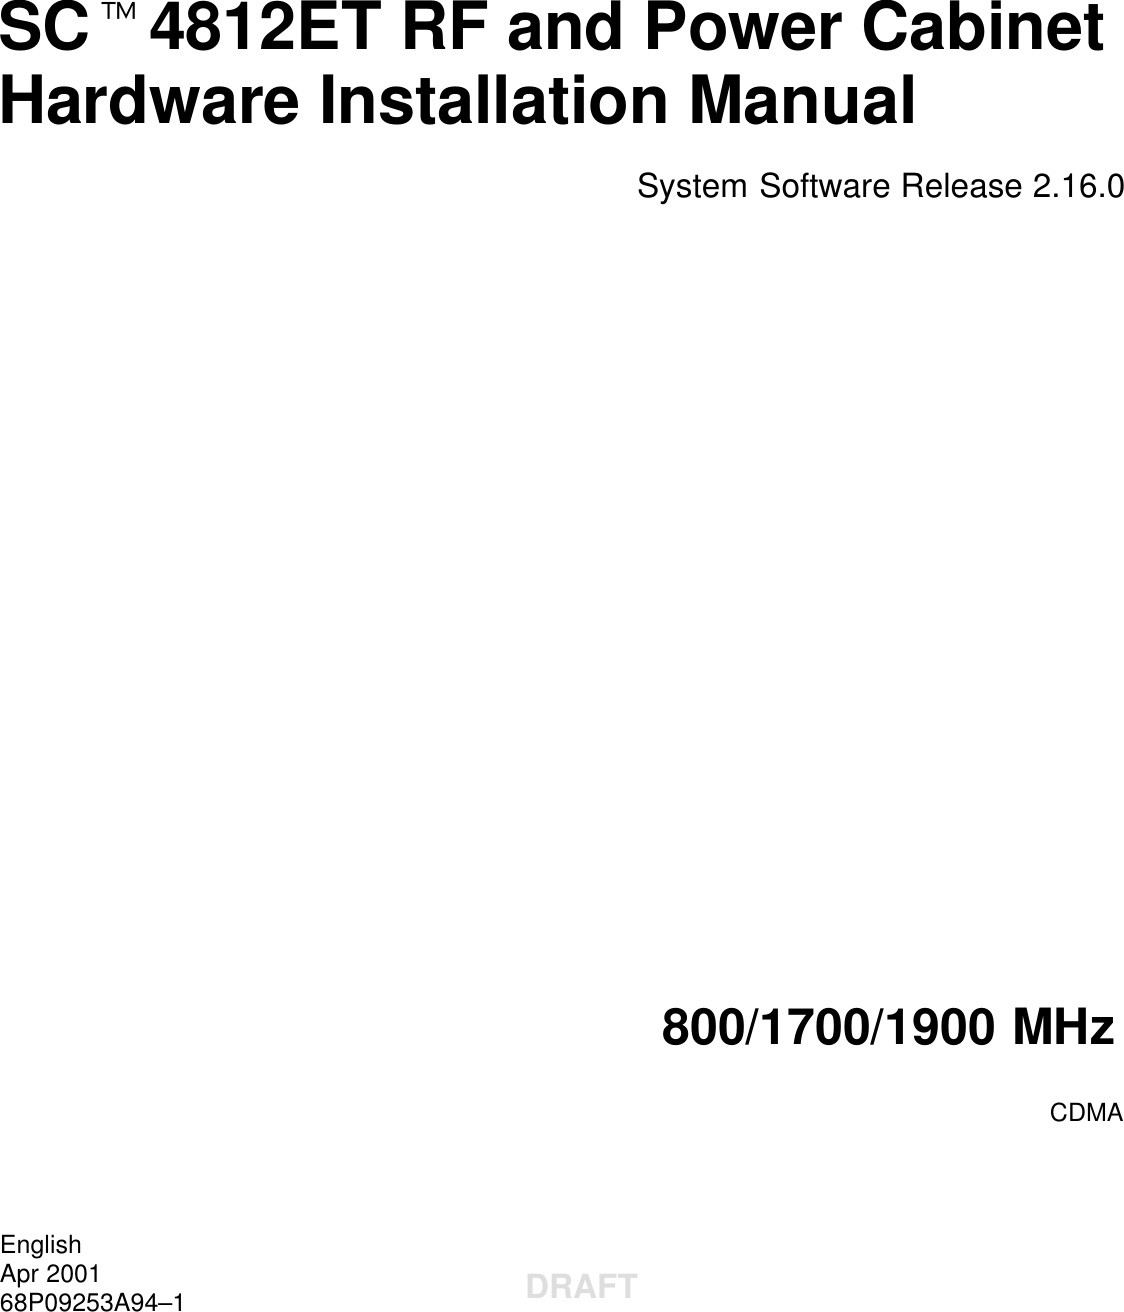 SCt4812ET RF and Power CabinetHardware Installation ManualSystem Software Release 2.16.0800/1700/1900 MHzCDMAEnglishApr 200168P09253A94–1 DRAFT